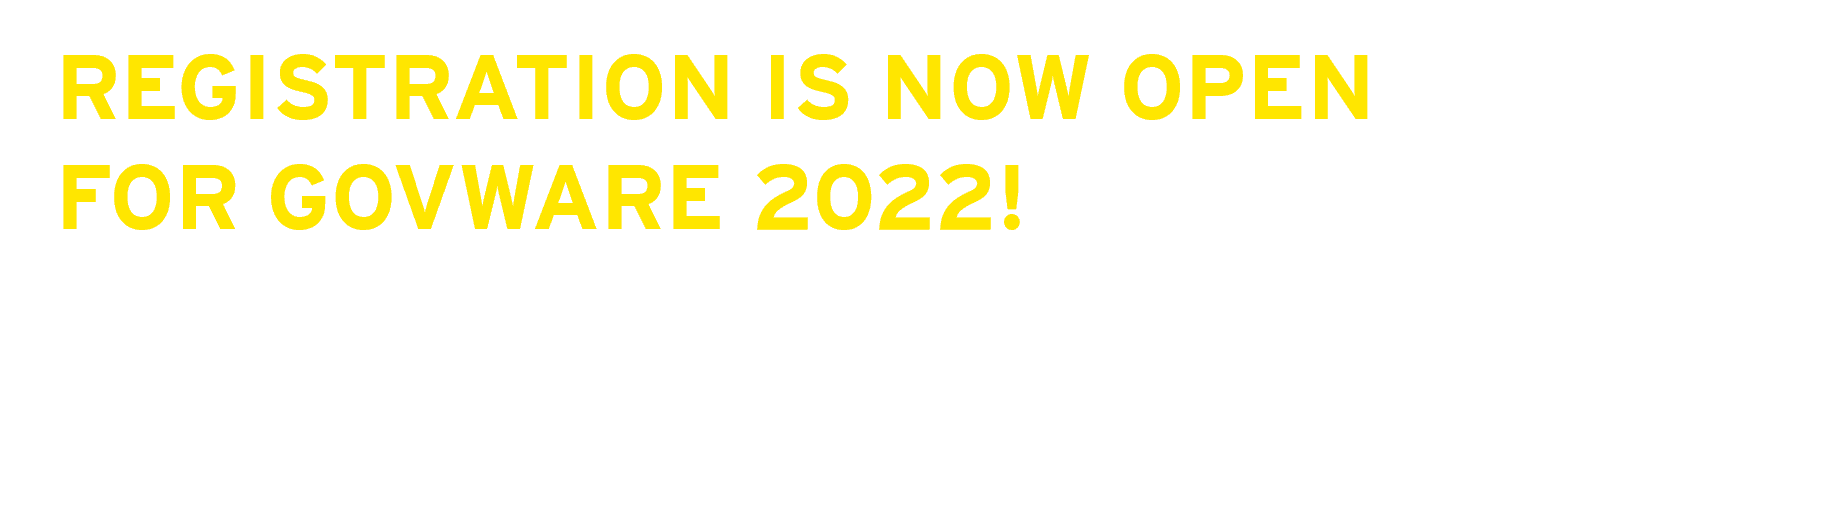 Registration for GovWare 2022 is now open!